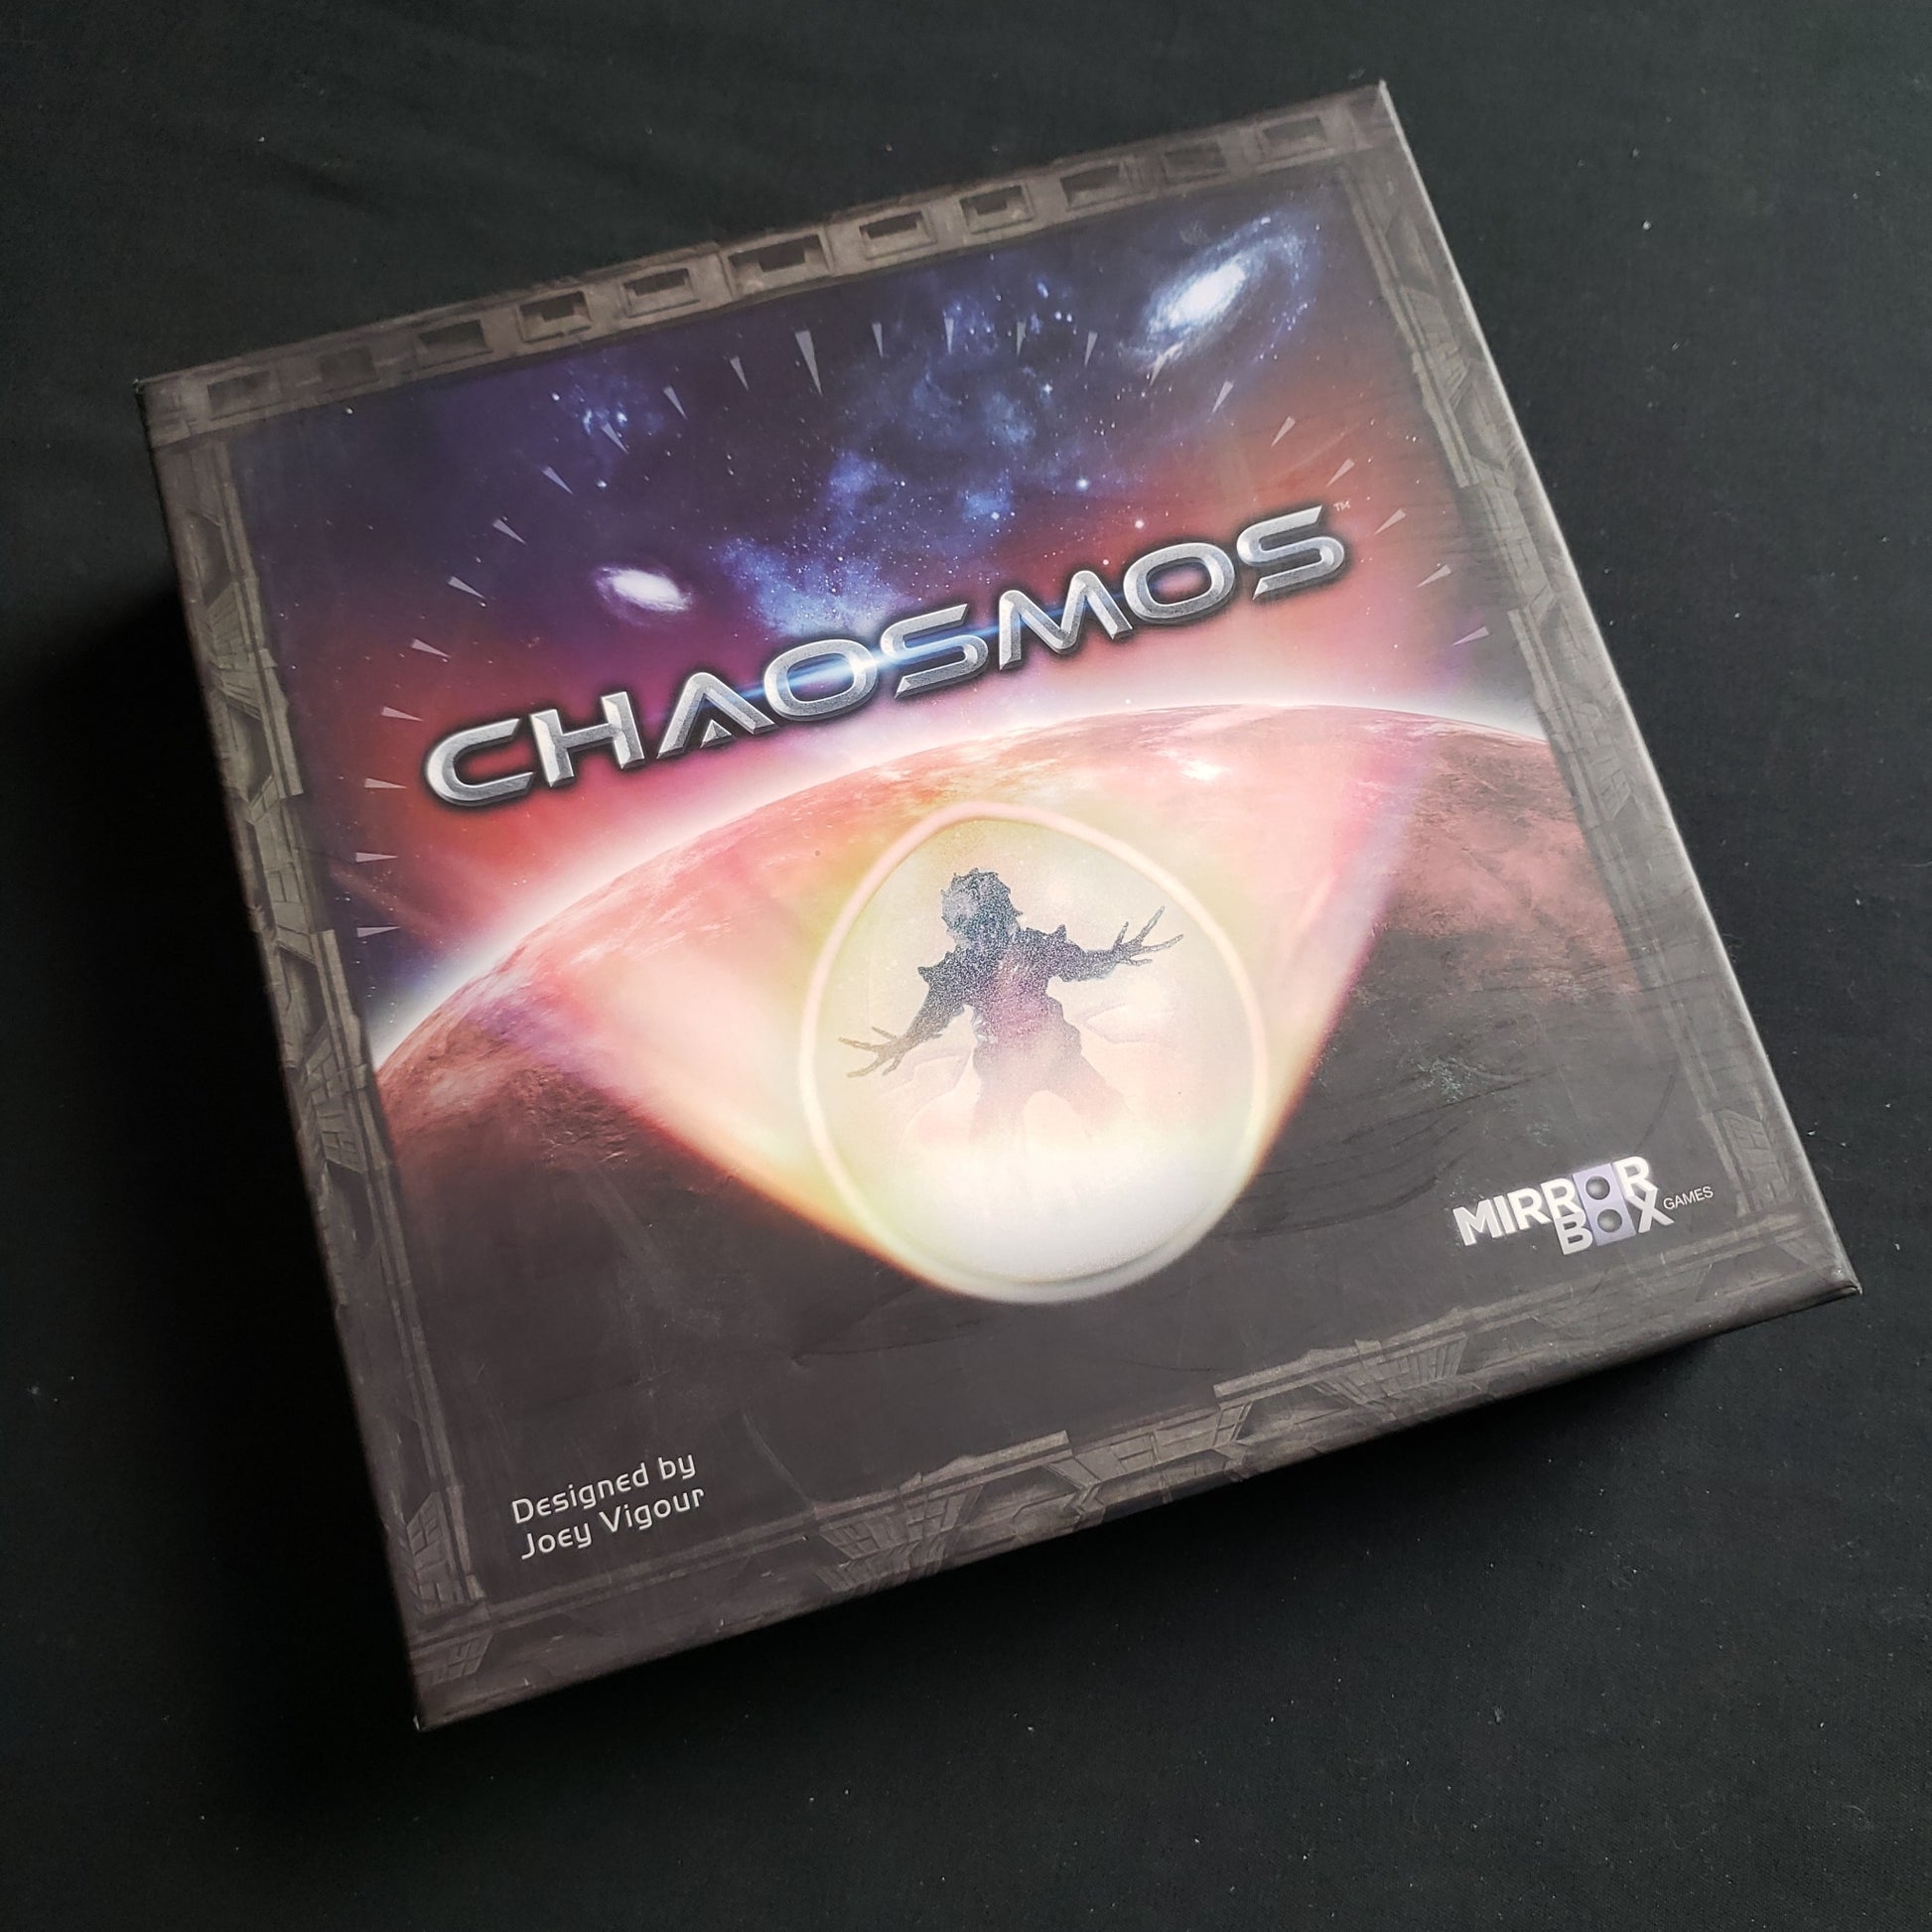 Image shows the front cover of the box of the Chaomos board game